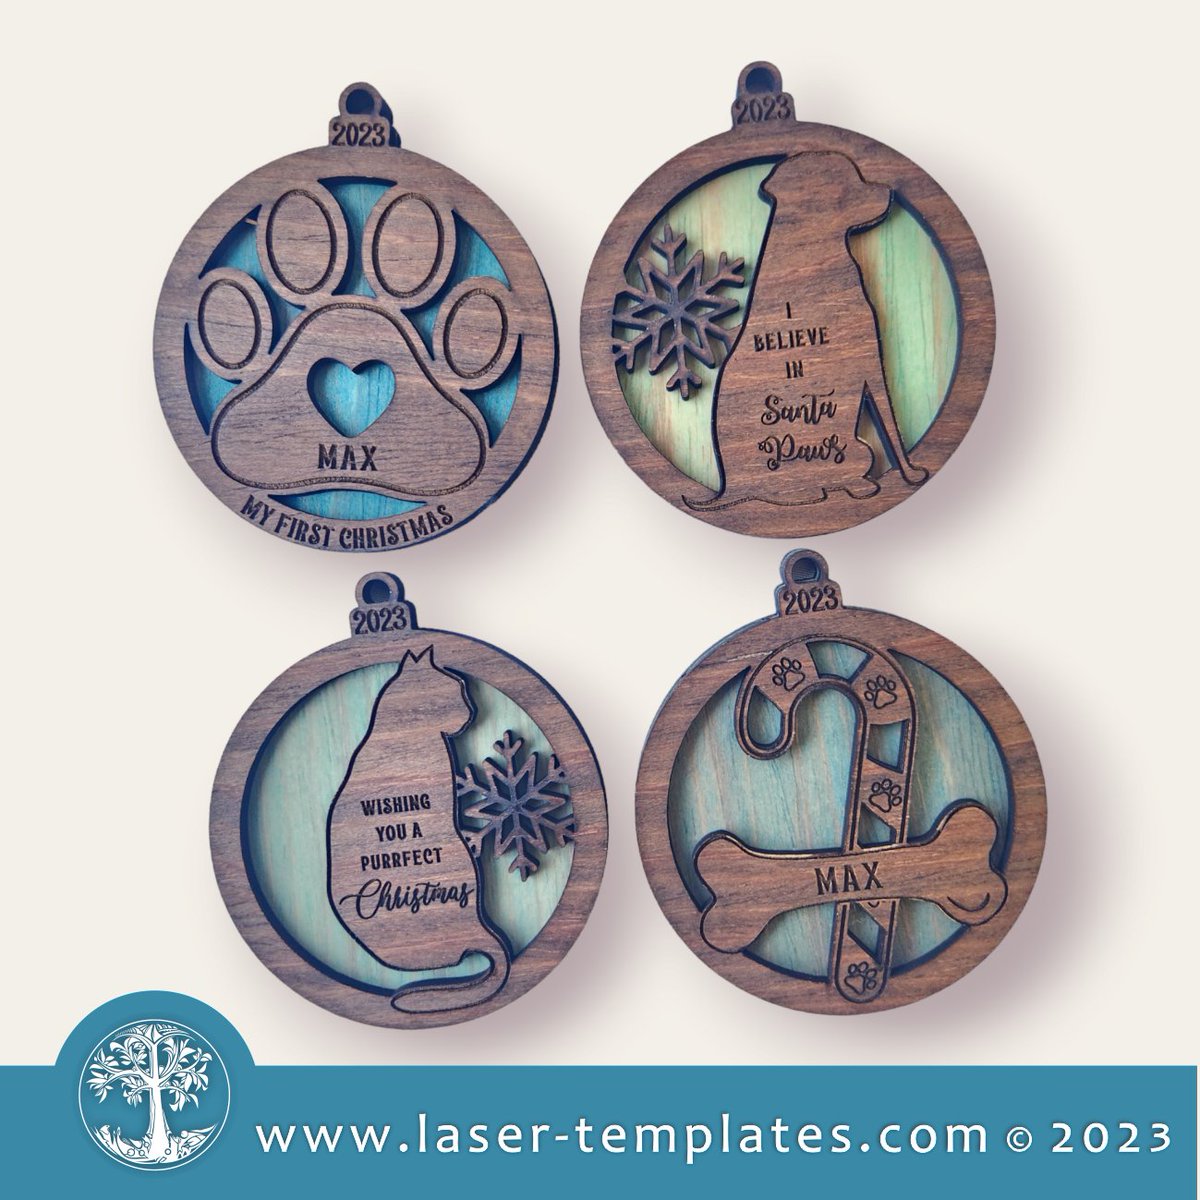 NEW pet Christmas ornament designs, now available for download laser-templates.com/collections/ne… #laserfiles #svgfiles #svgcuttingfiles #lasercuttingandengraving